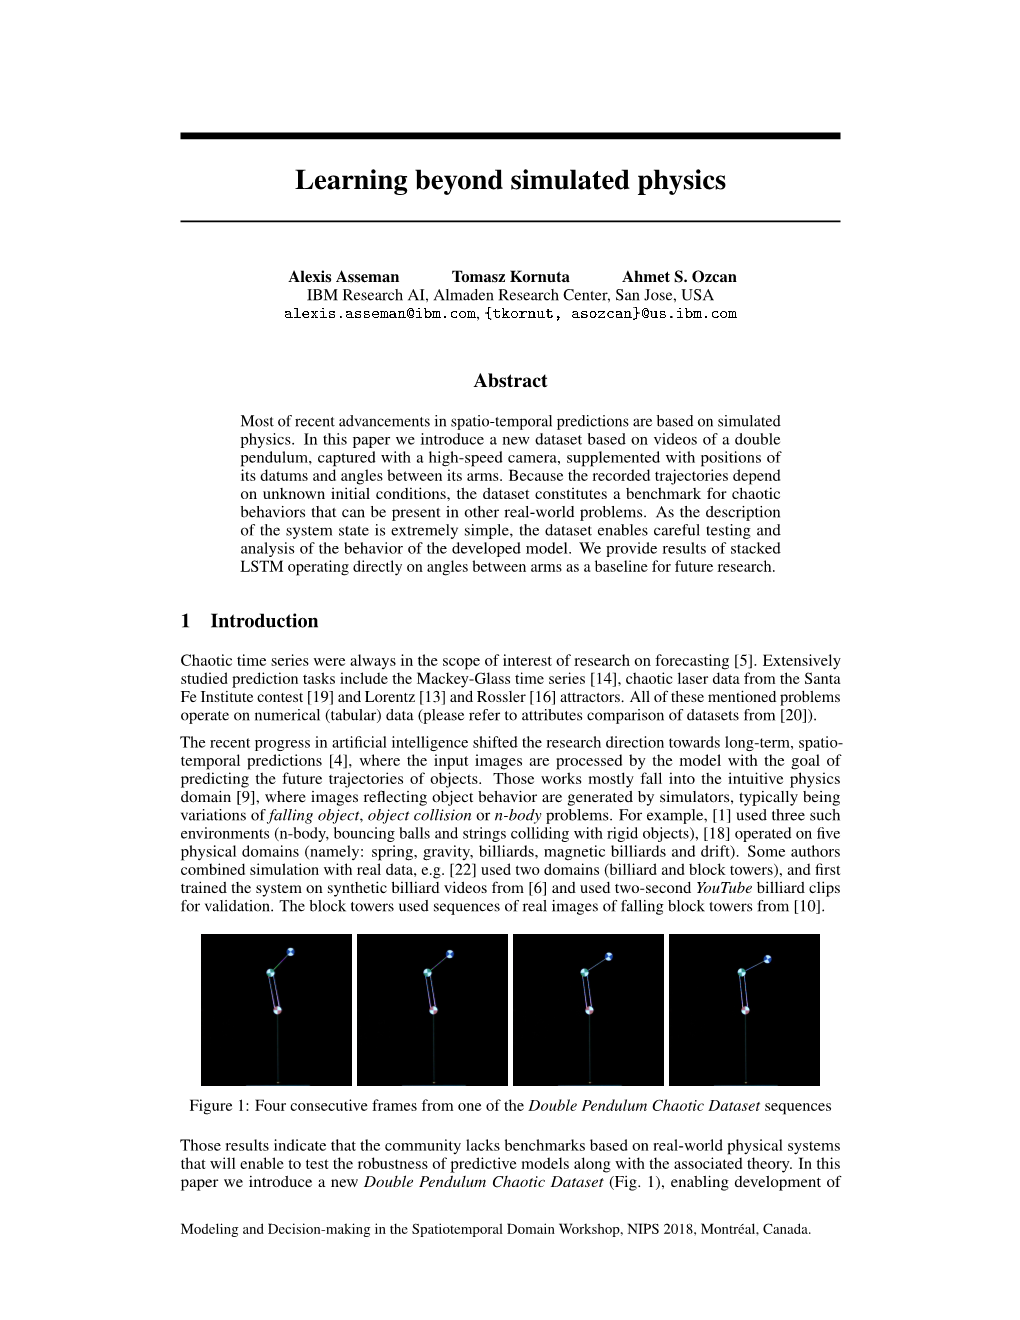 Learning Beyond Simulated Physics